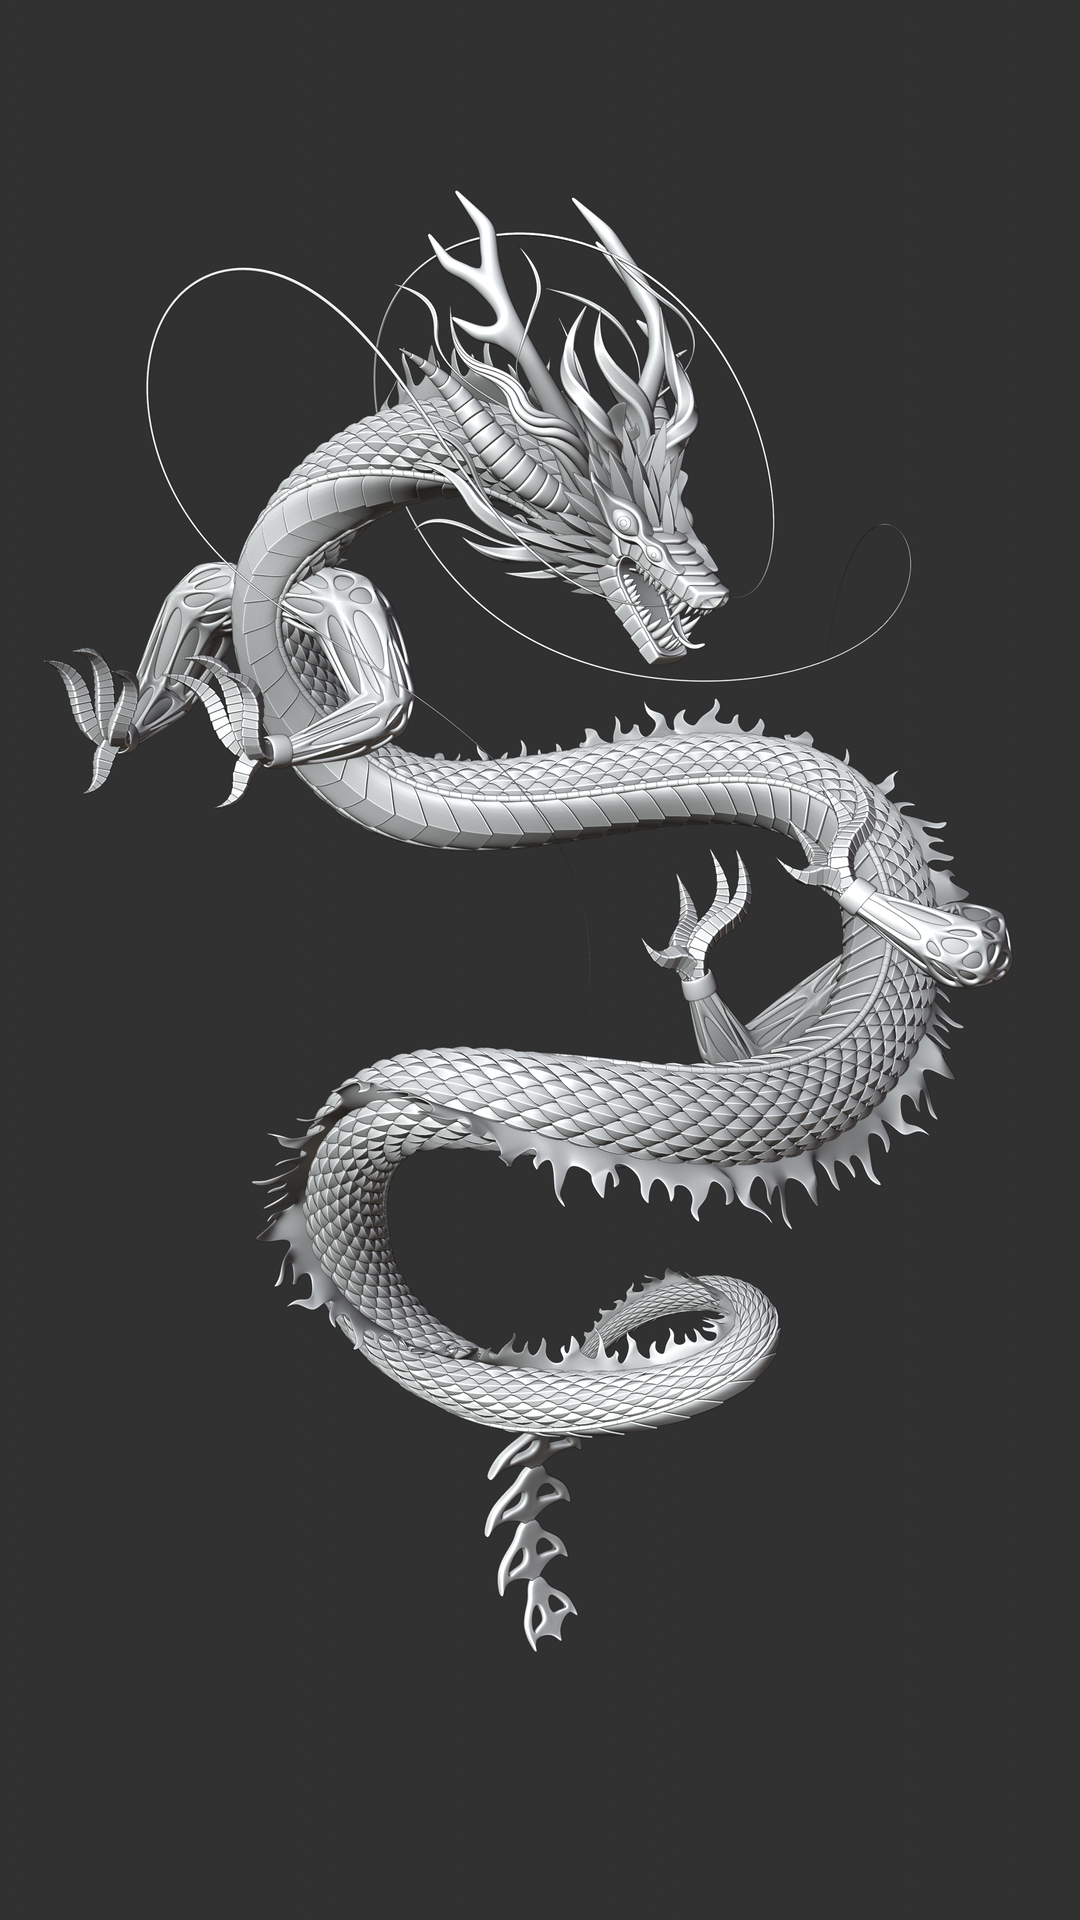 Chinese Dragon - Animations - Blender Artists Community